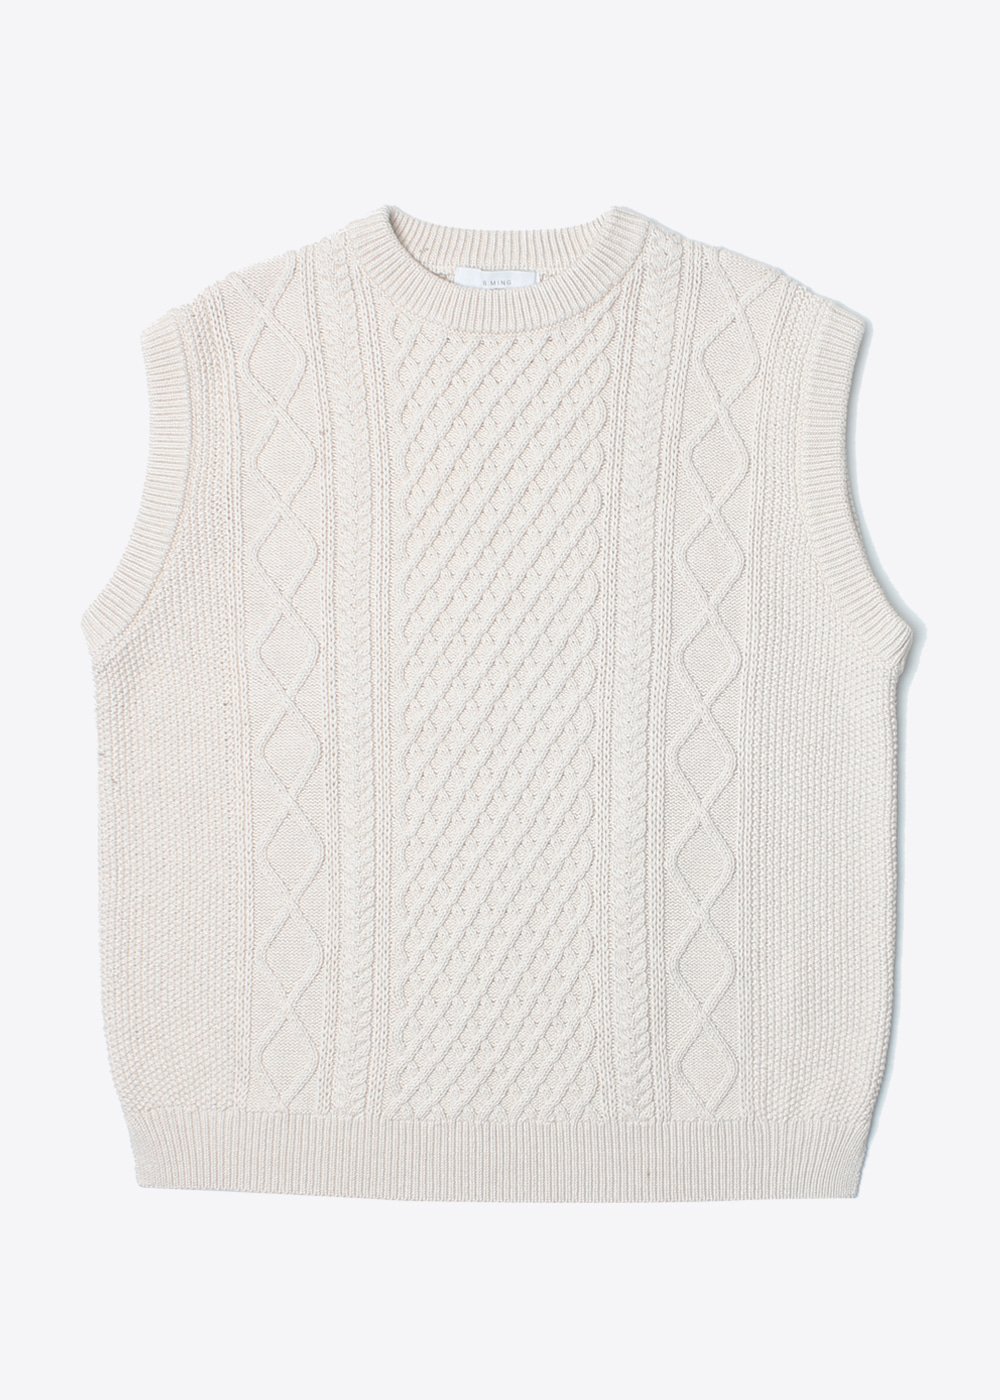 BEAMS’over fit’ wool knit vest